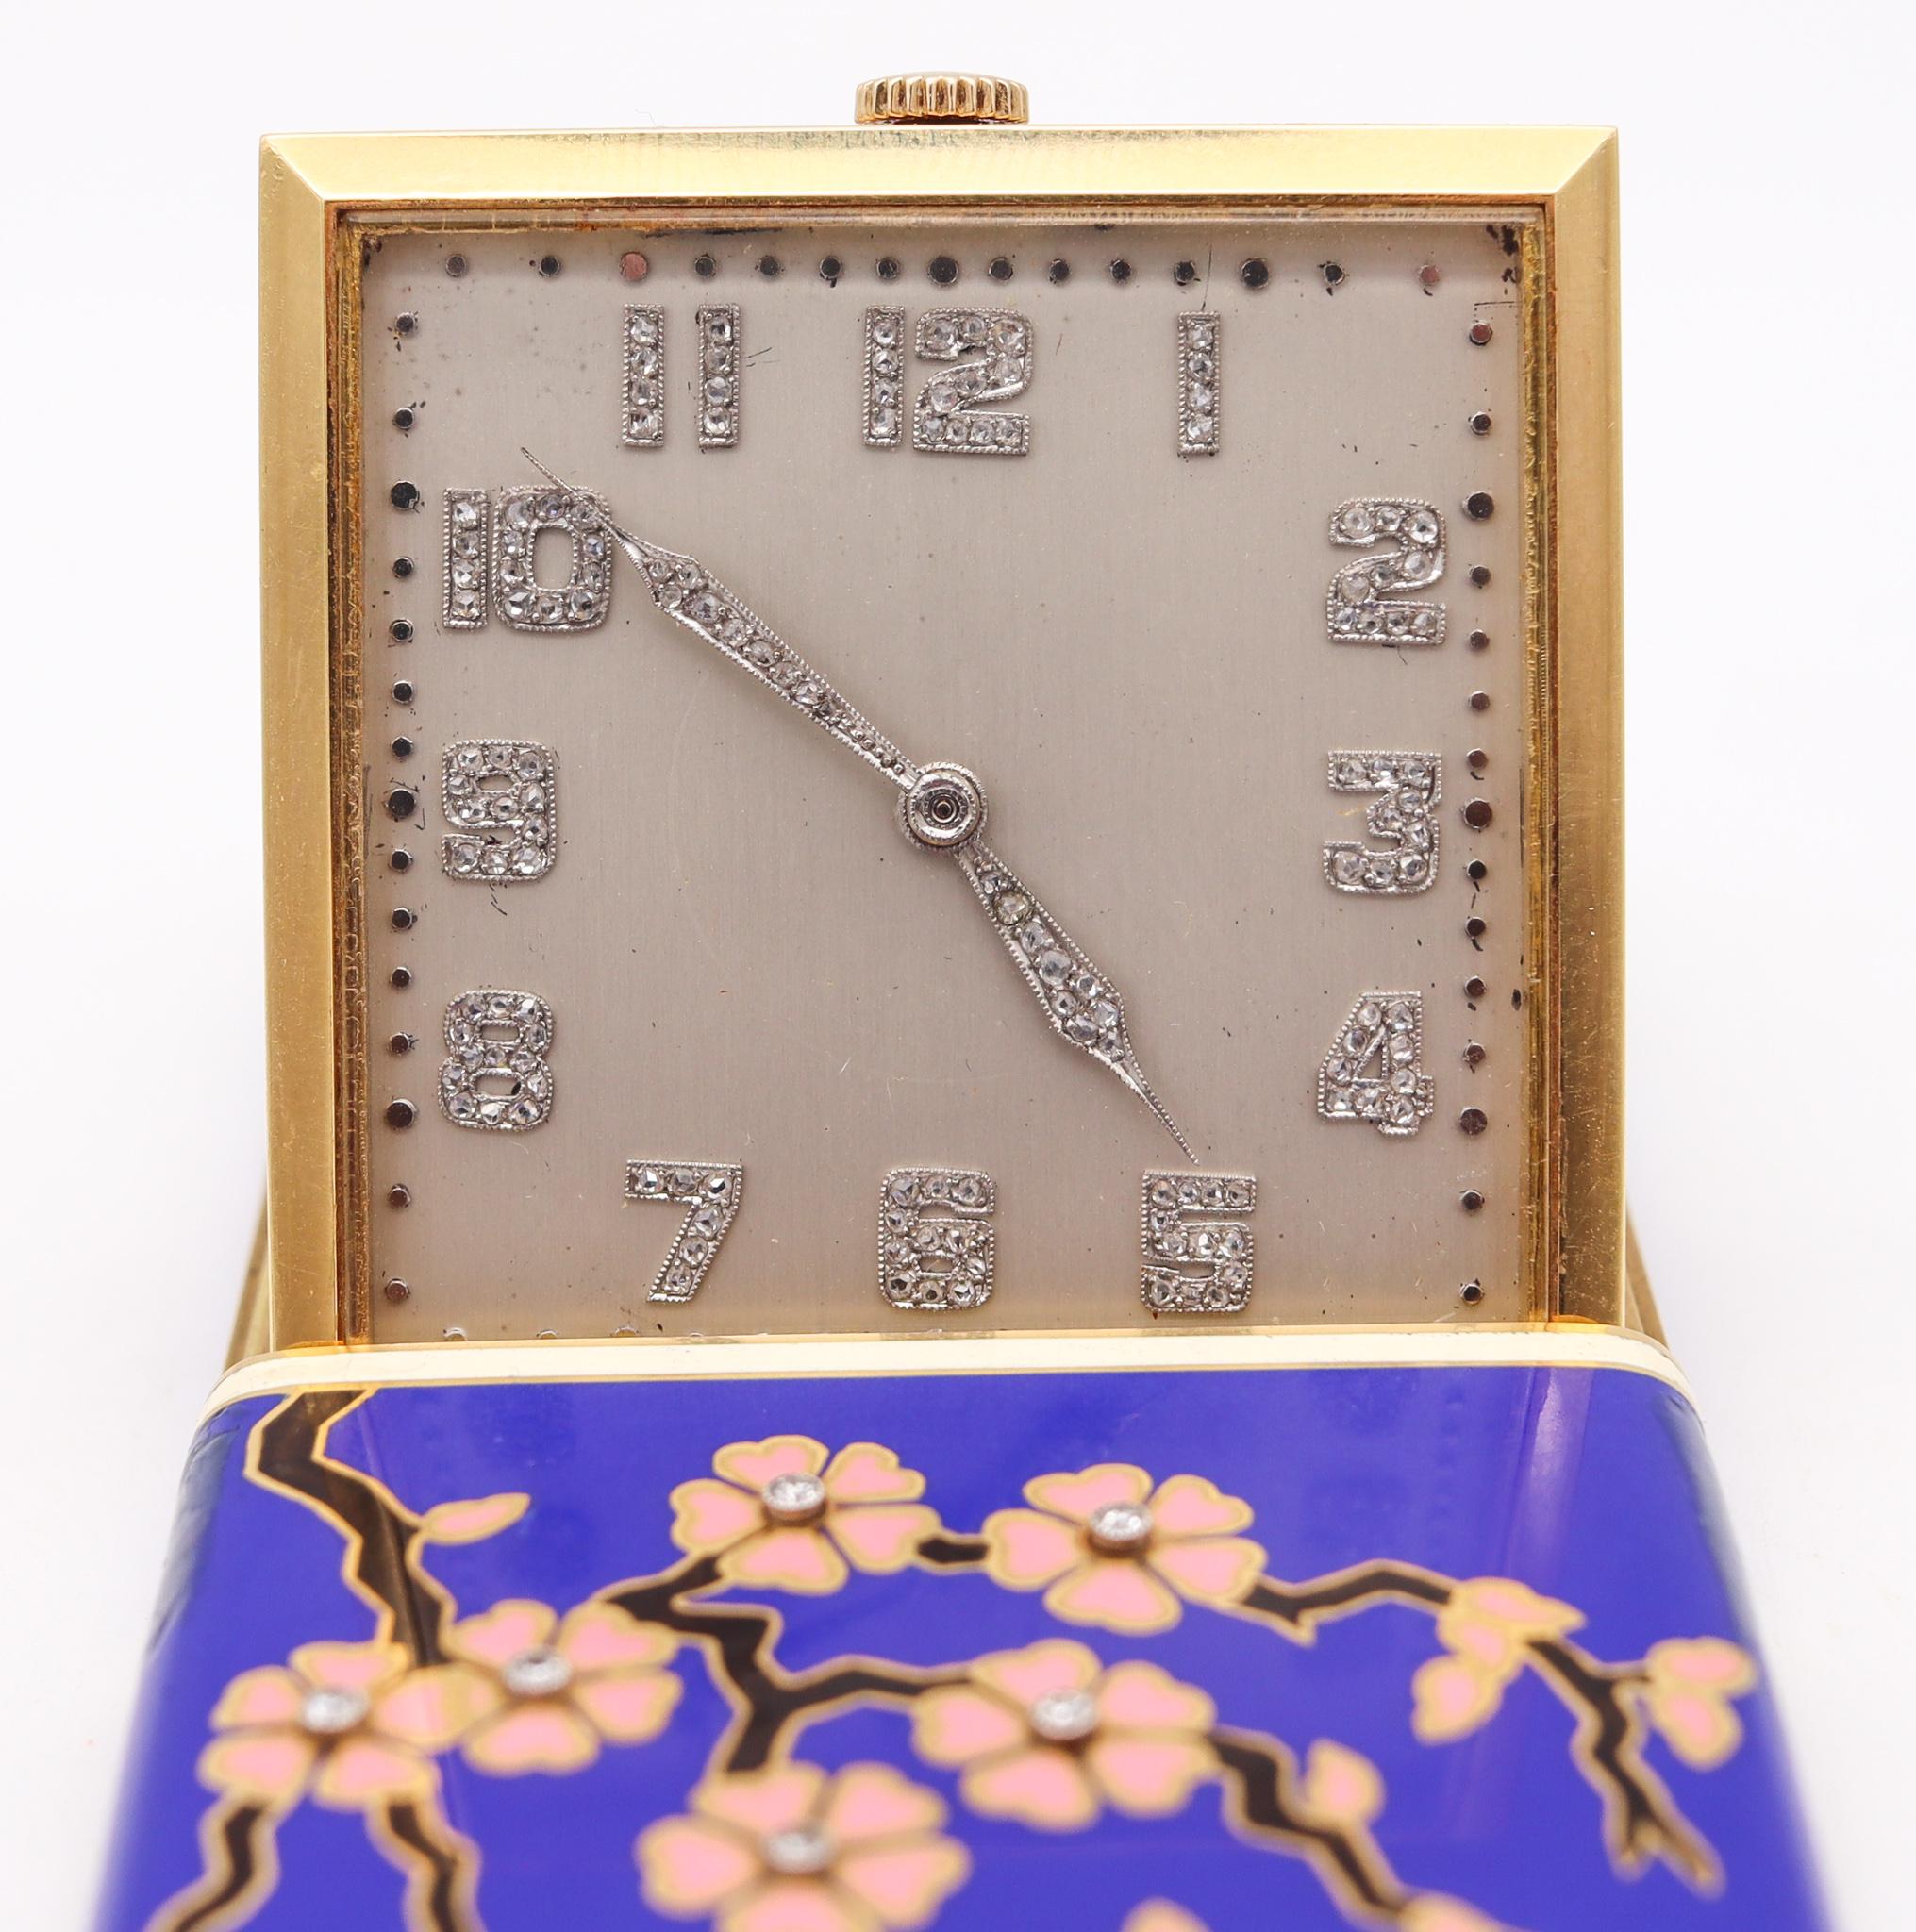 A travel clock designed by Cress Arrow Co.

An incredible travel-desk clock, created in America during the art deco period by the jewelry and luxury watches makers Cress Arrow Co., back in the 1925. This fabulous flamboyant piece is a truly